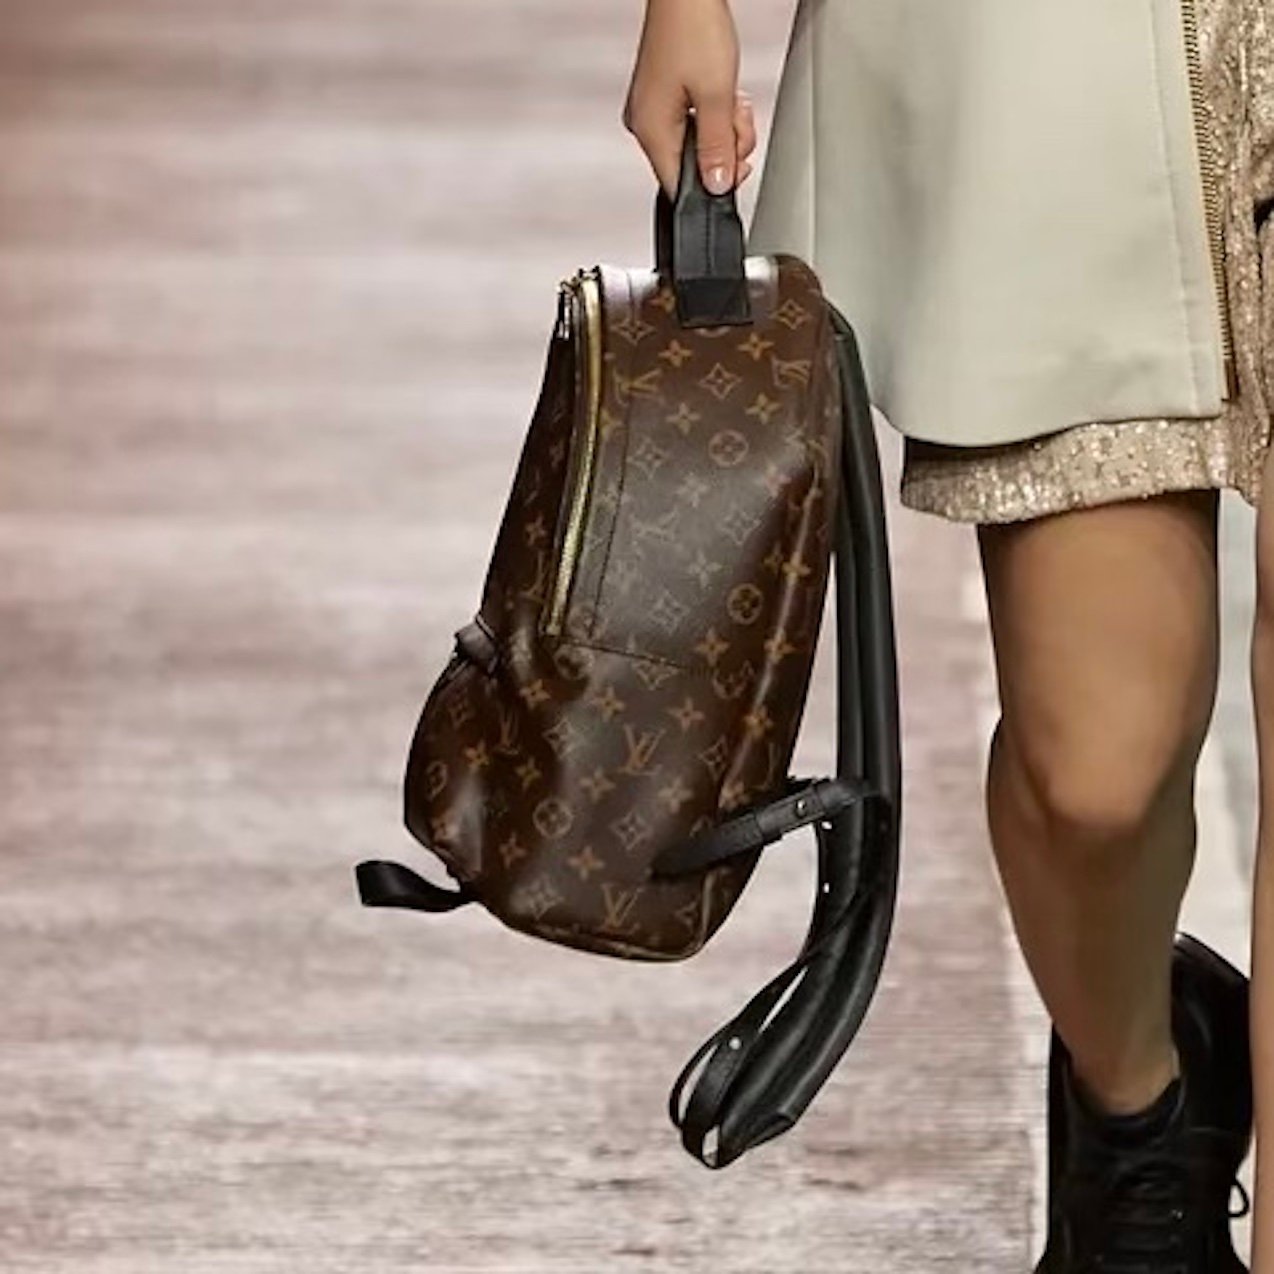 Louis Vuitton Introducing New Backpack Collection, Bragmybag